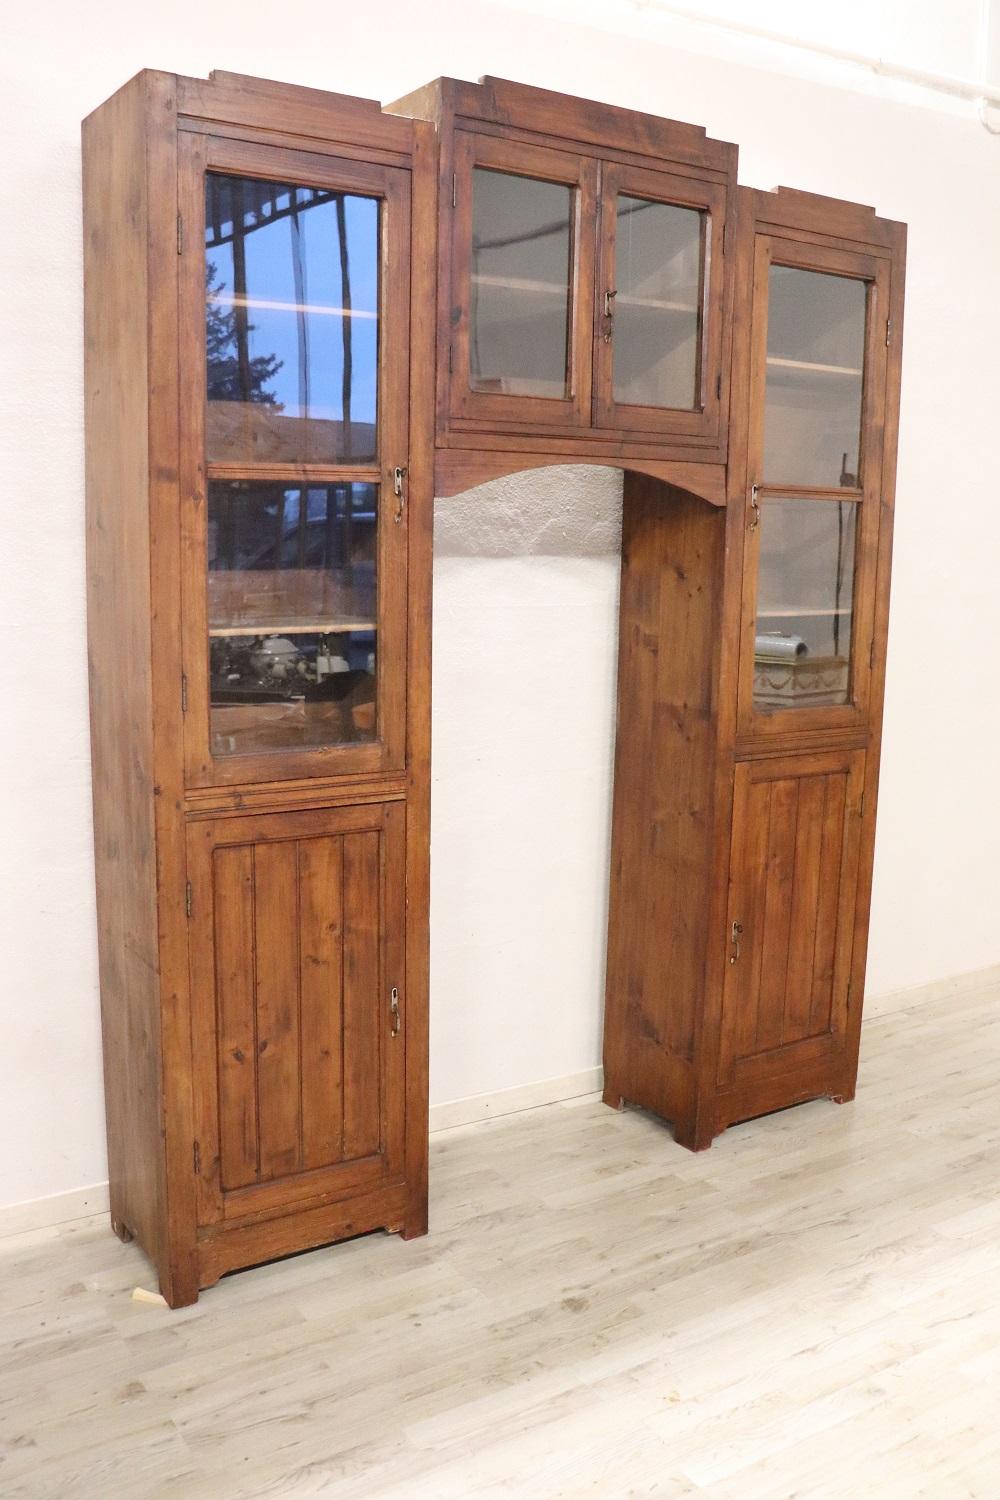 Italian large arched bookcase 1920s in solid fir wood. Large internal useful space. Beautiful linear and rustic line. In the upper part, glass doors to display your best items or books. It is divided into three parts for a practical transport. This